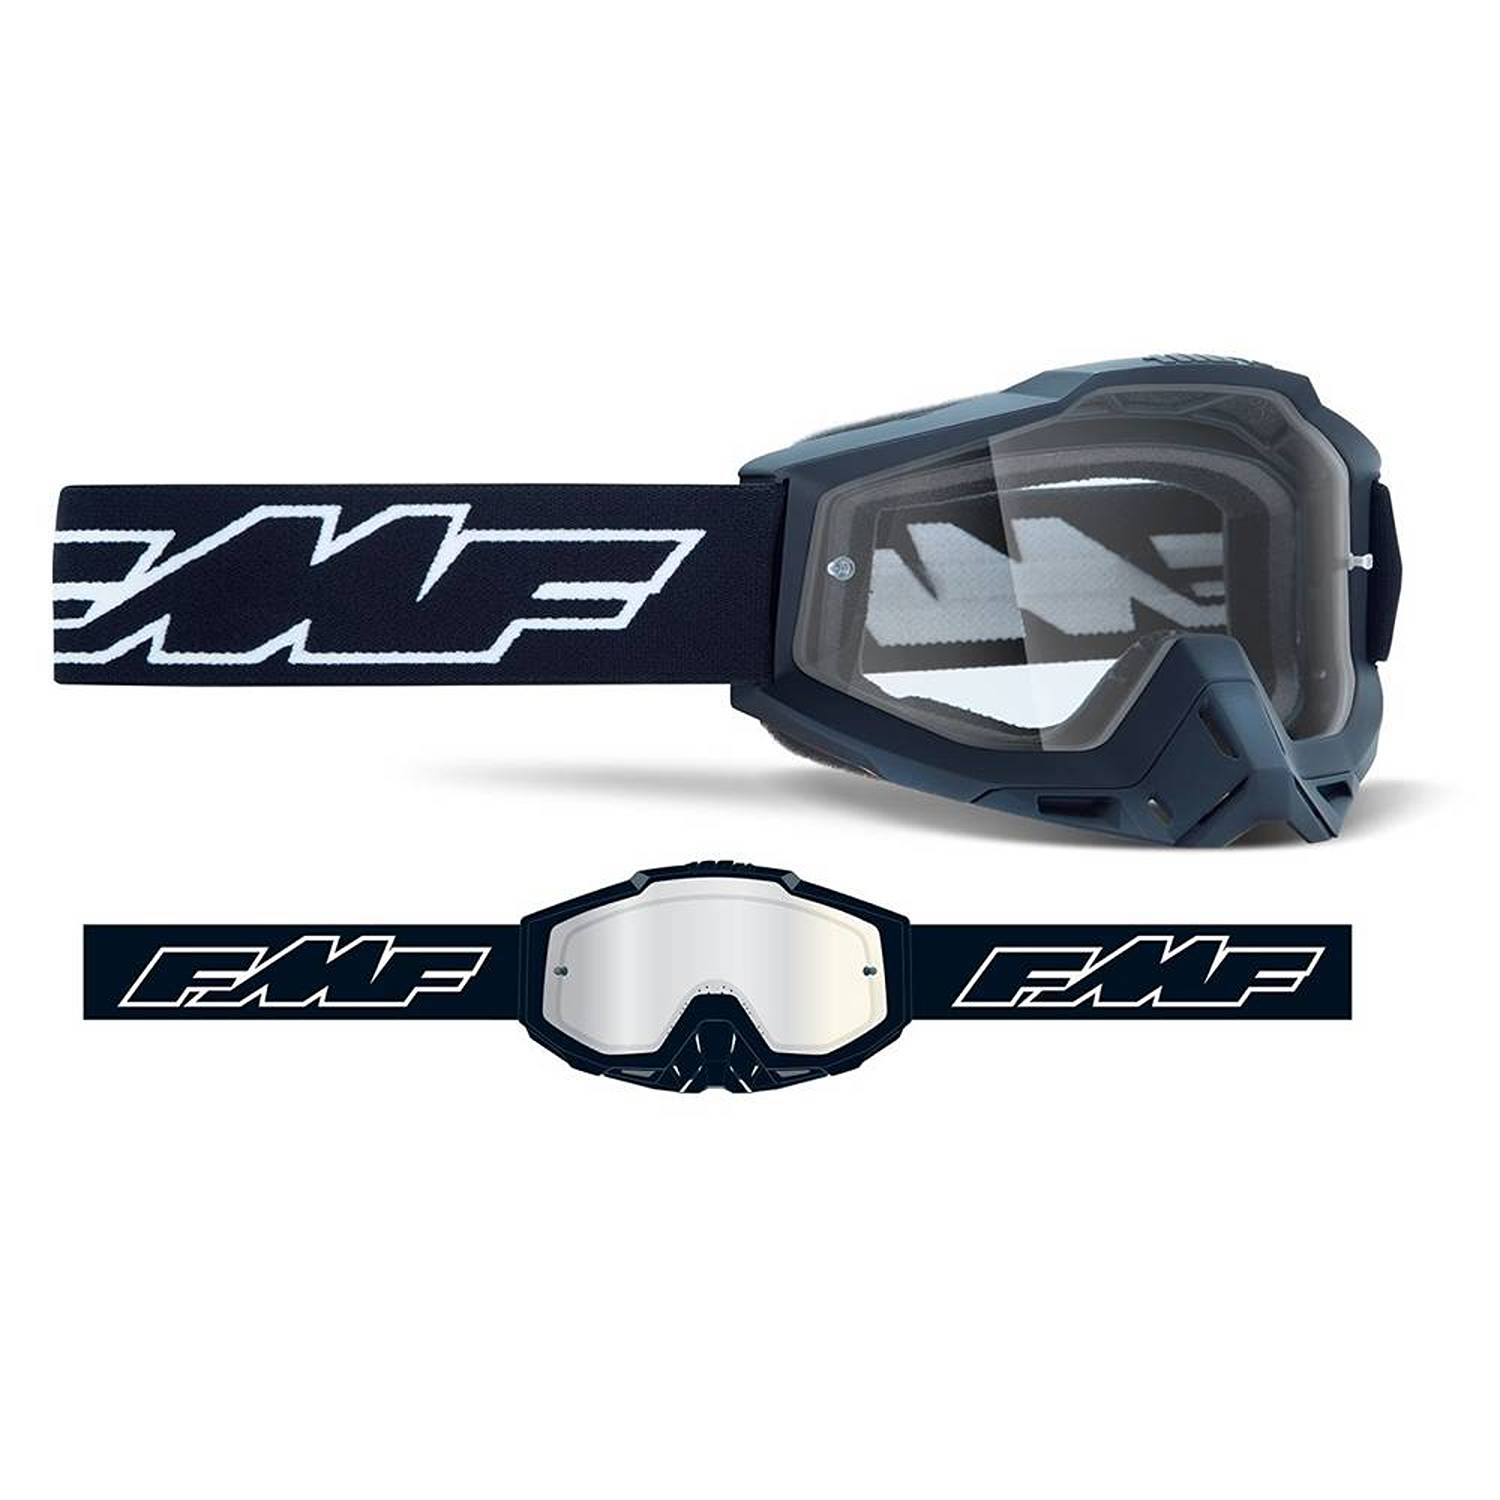 FMF Powerbomb Rocket Black Clear Goggles Size